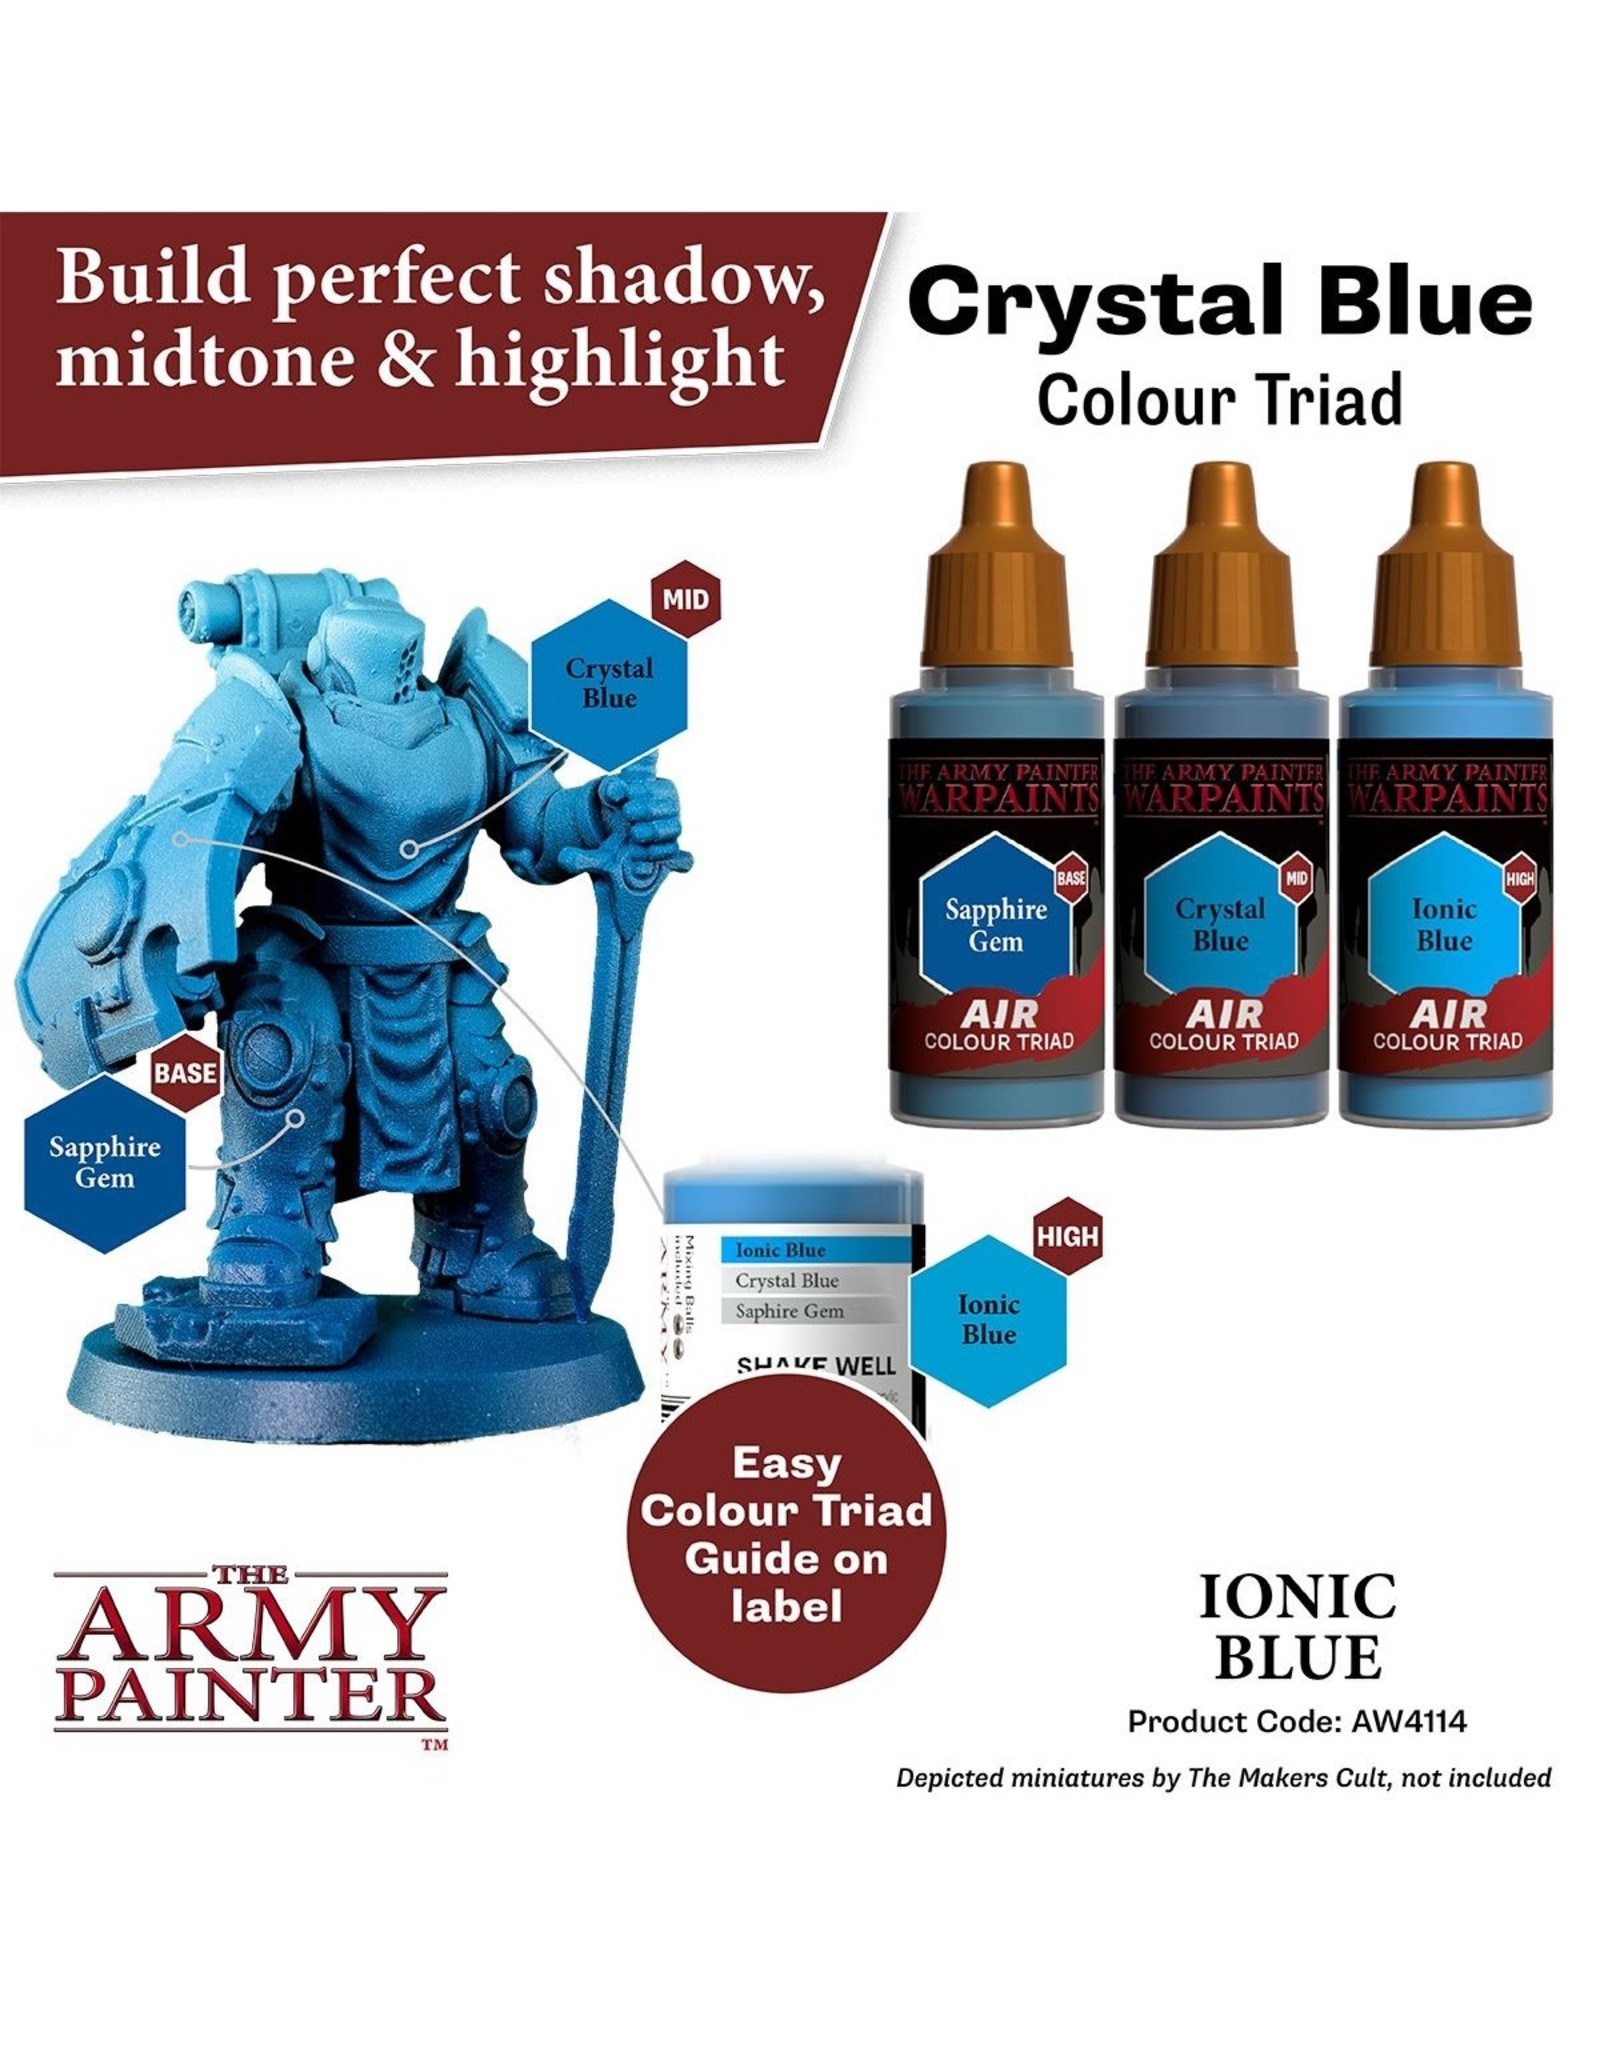 The Army Painter Warpaint Air: Ionic Blue (18ml)